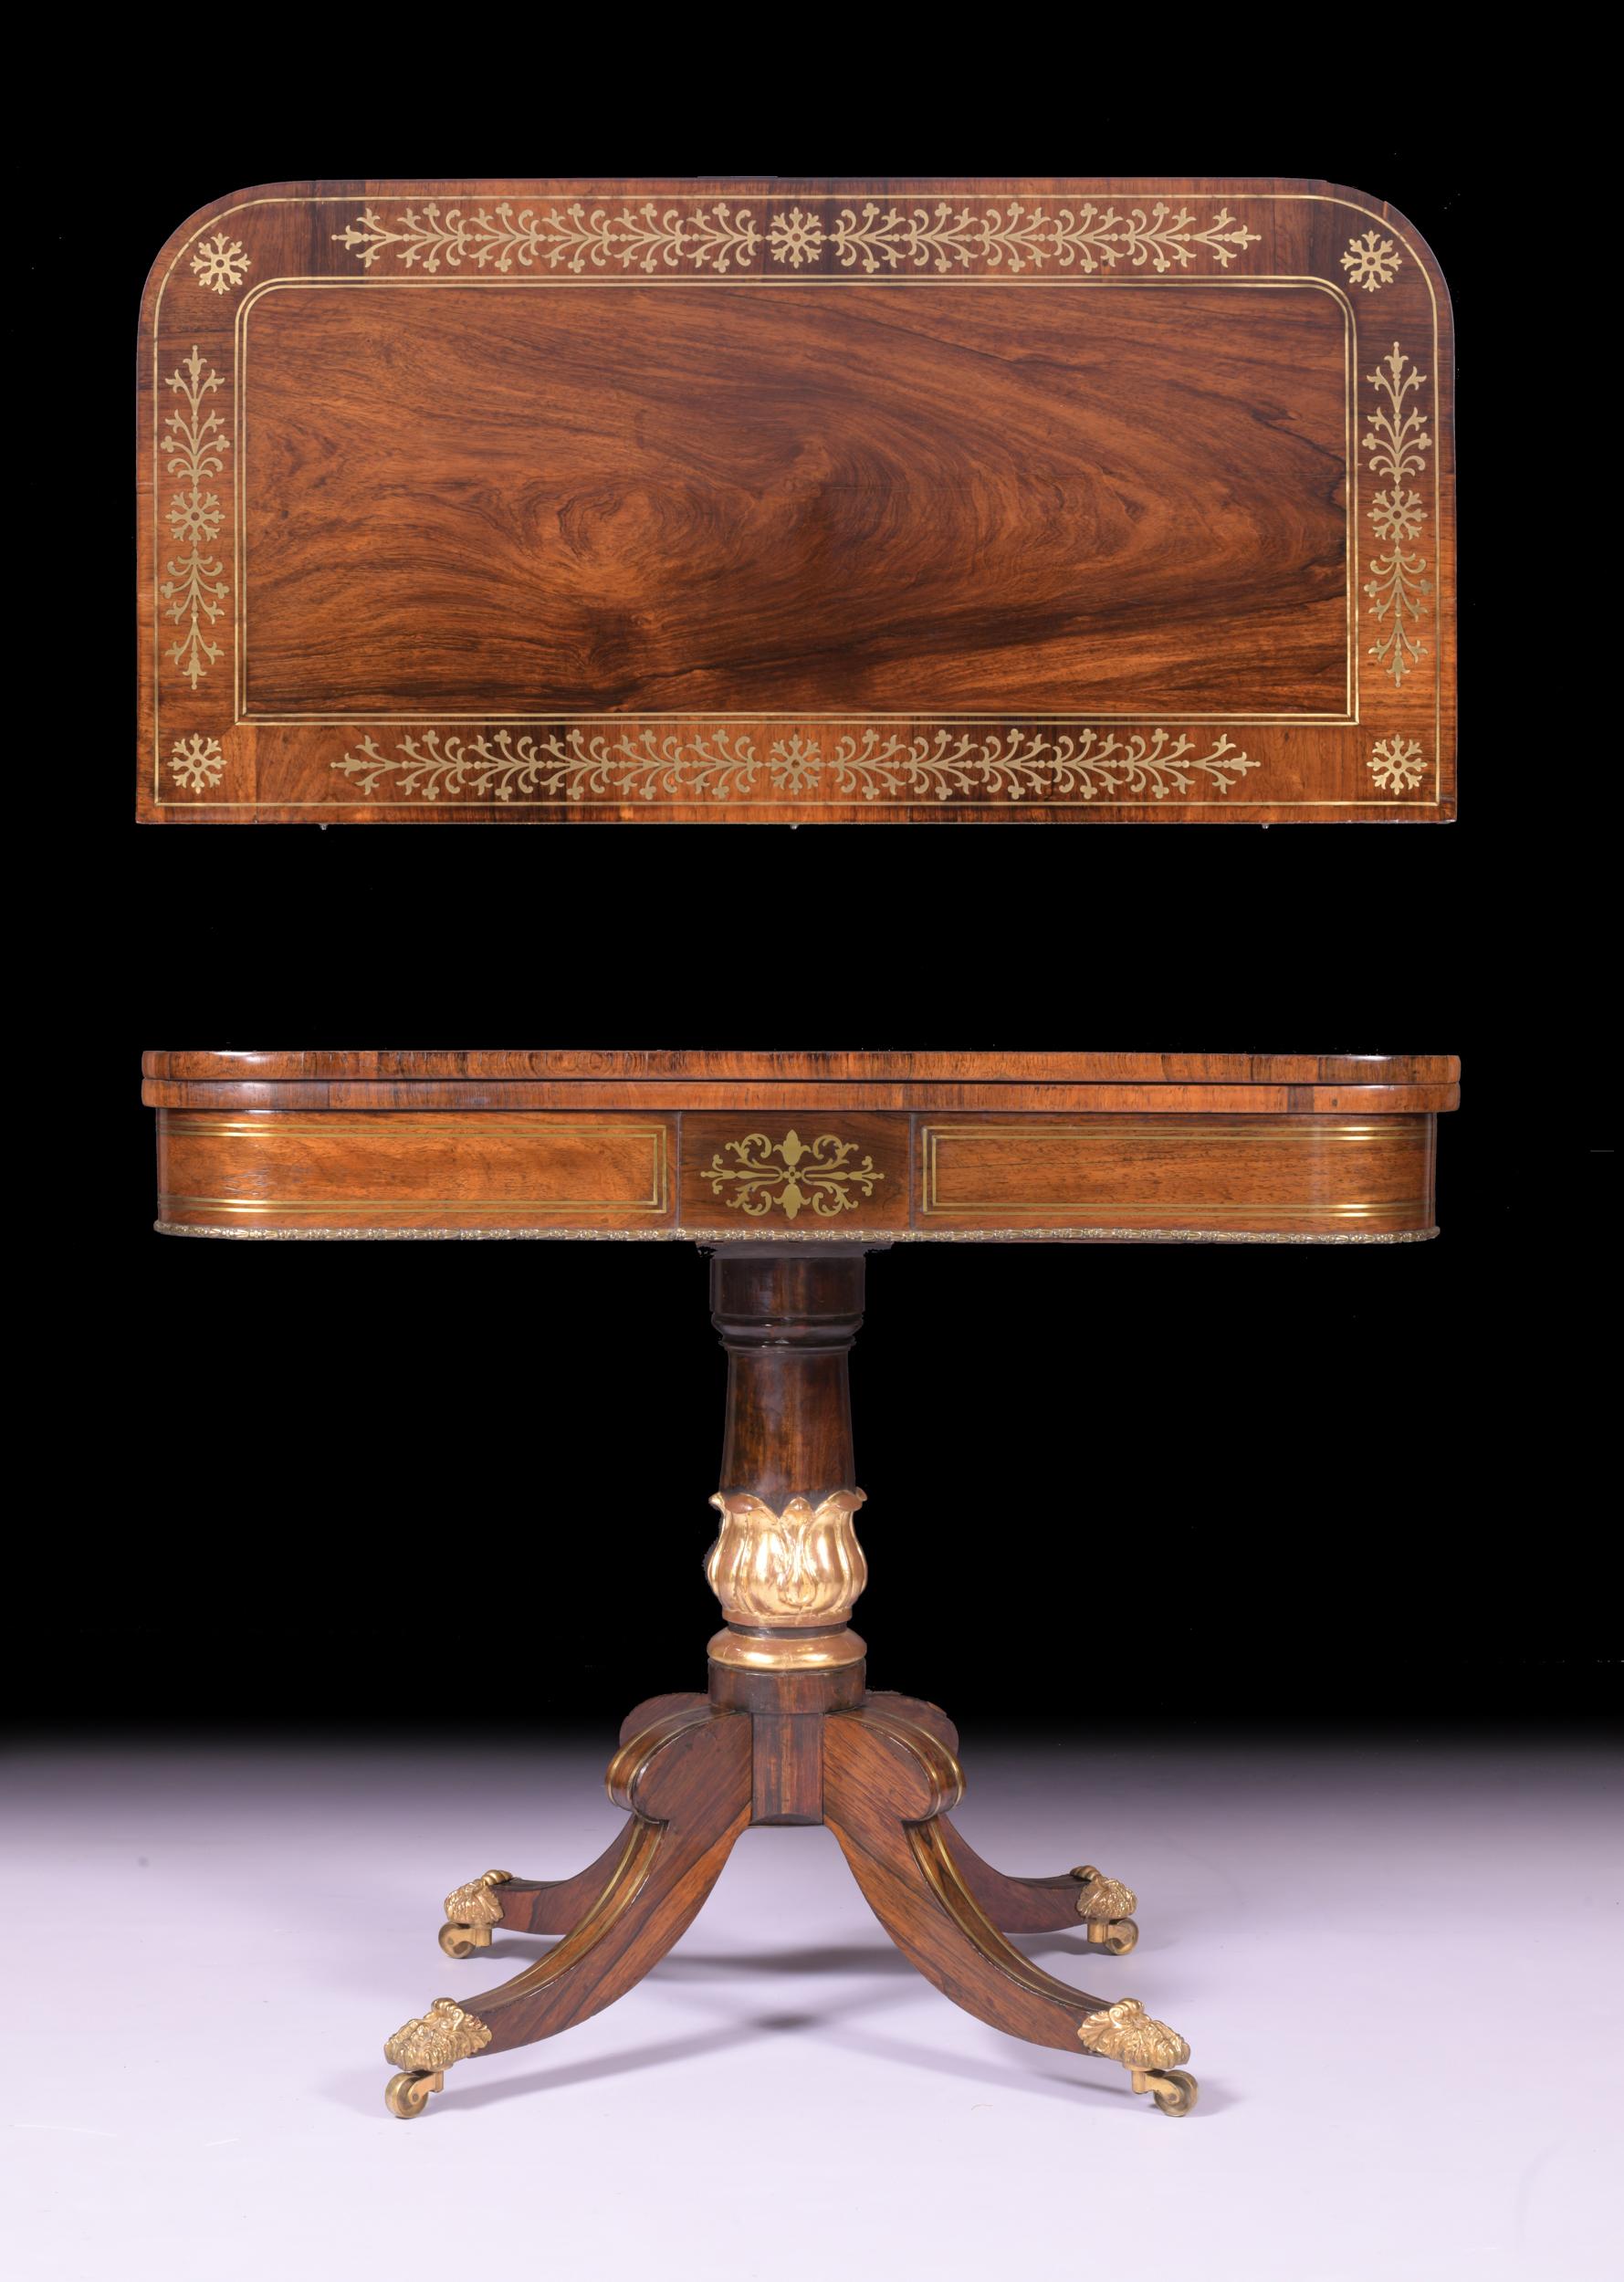 A fine Regency rosewood and brass inlaid card table, the rectangular top with rounded corners and a swivel-hinged top, enclosing a green baize inset playing surface, raised on a baluster column featuring a carved parcel gilt acanthus, terminating on